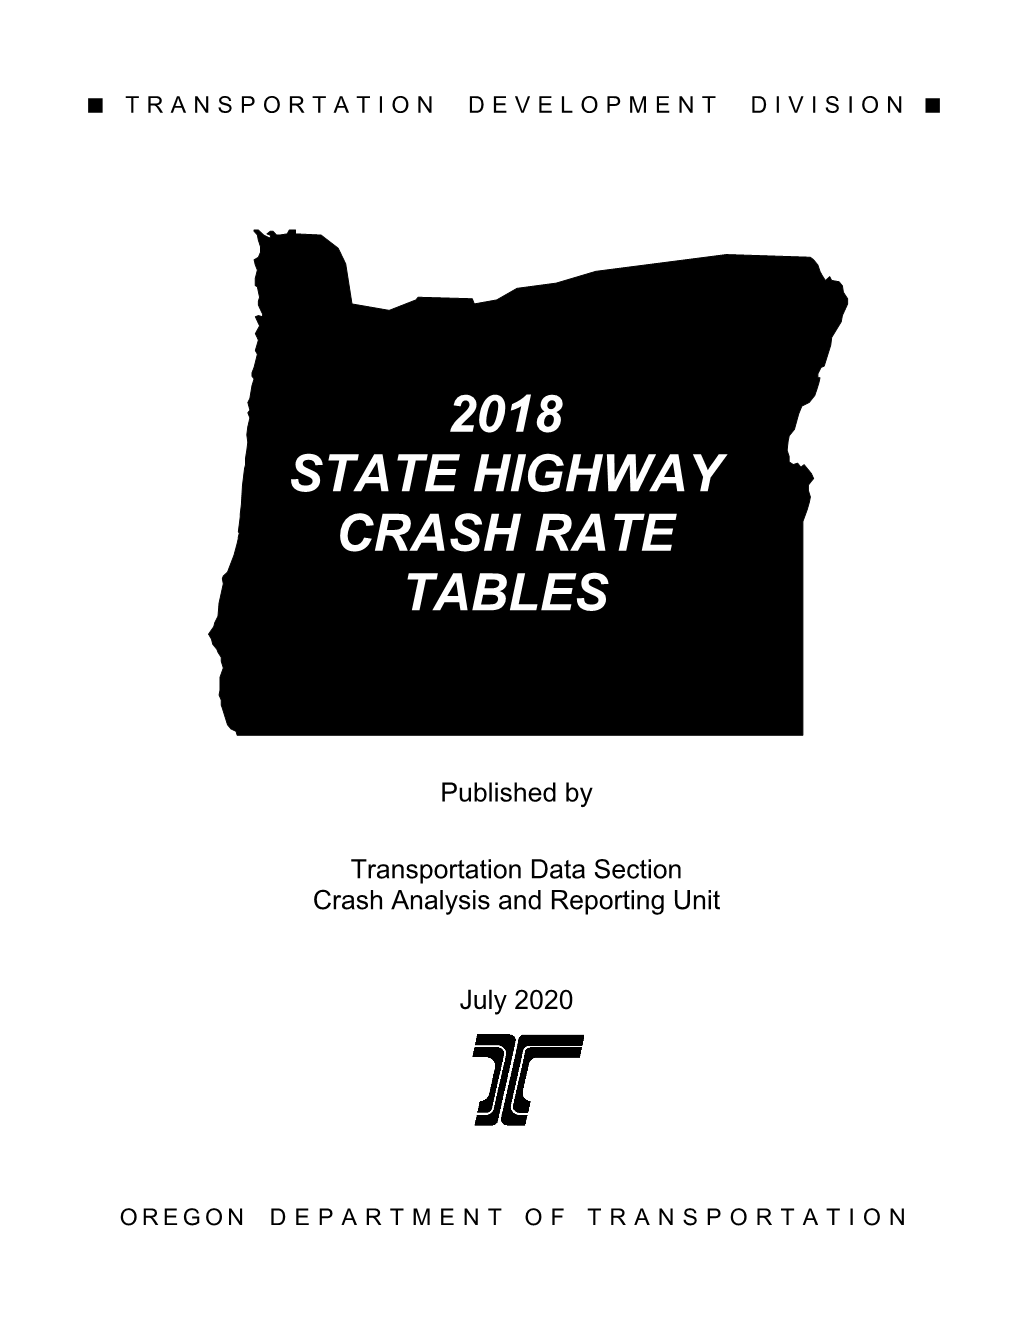 2018 State Highway Crash Rate Tables